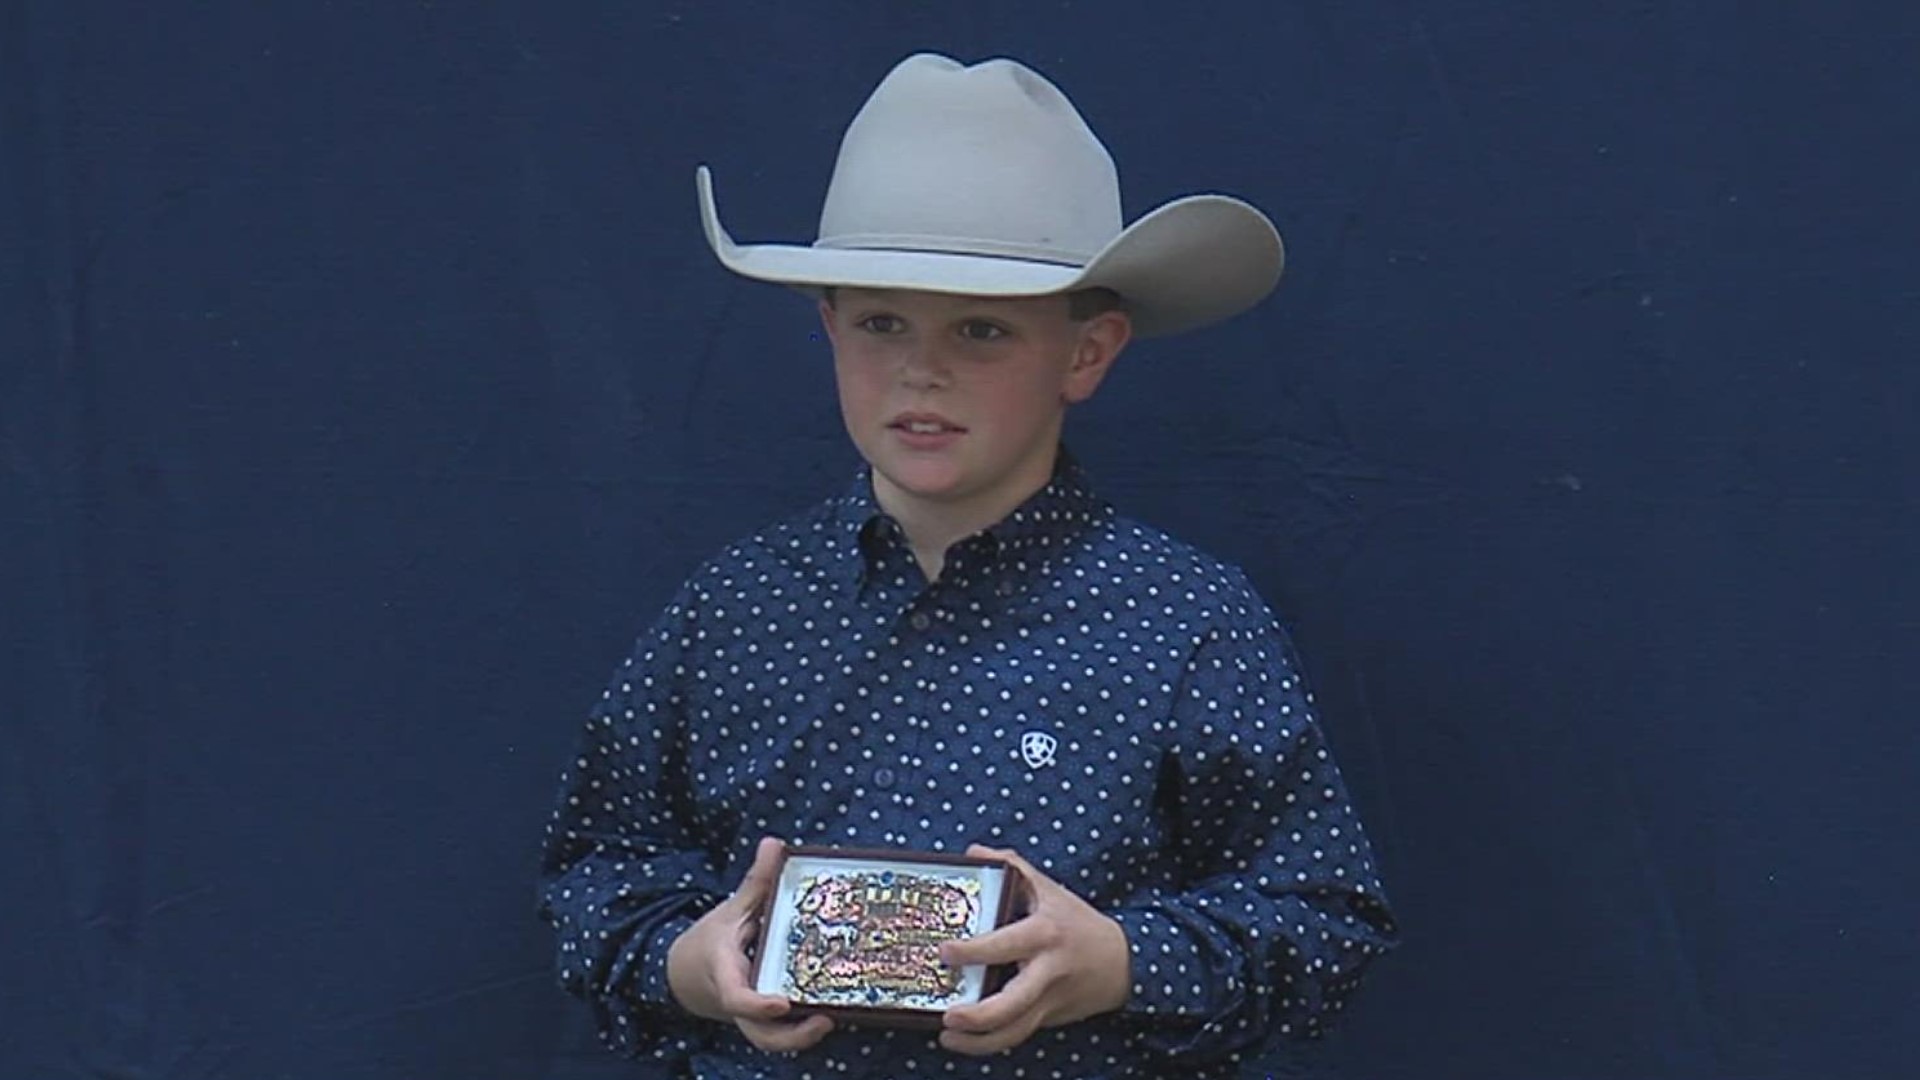 "I'll be the first person to say I wouldn't be the person I am today if it wasn't for the livestock show and the community." Ambassador, Caleb McMullen said.